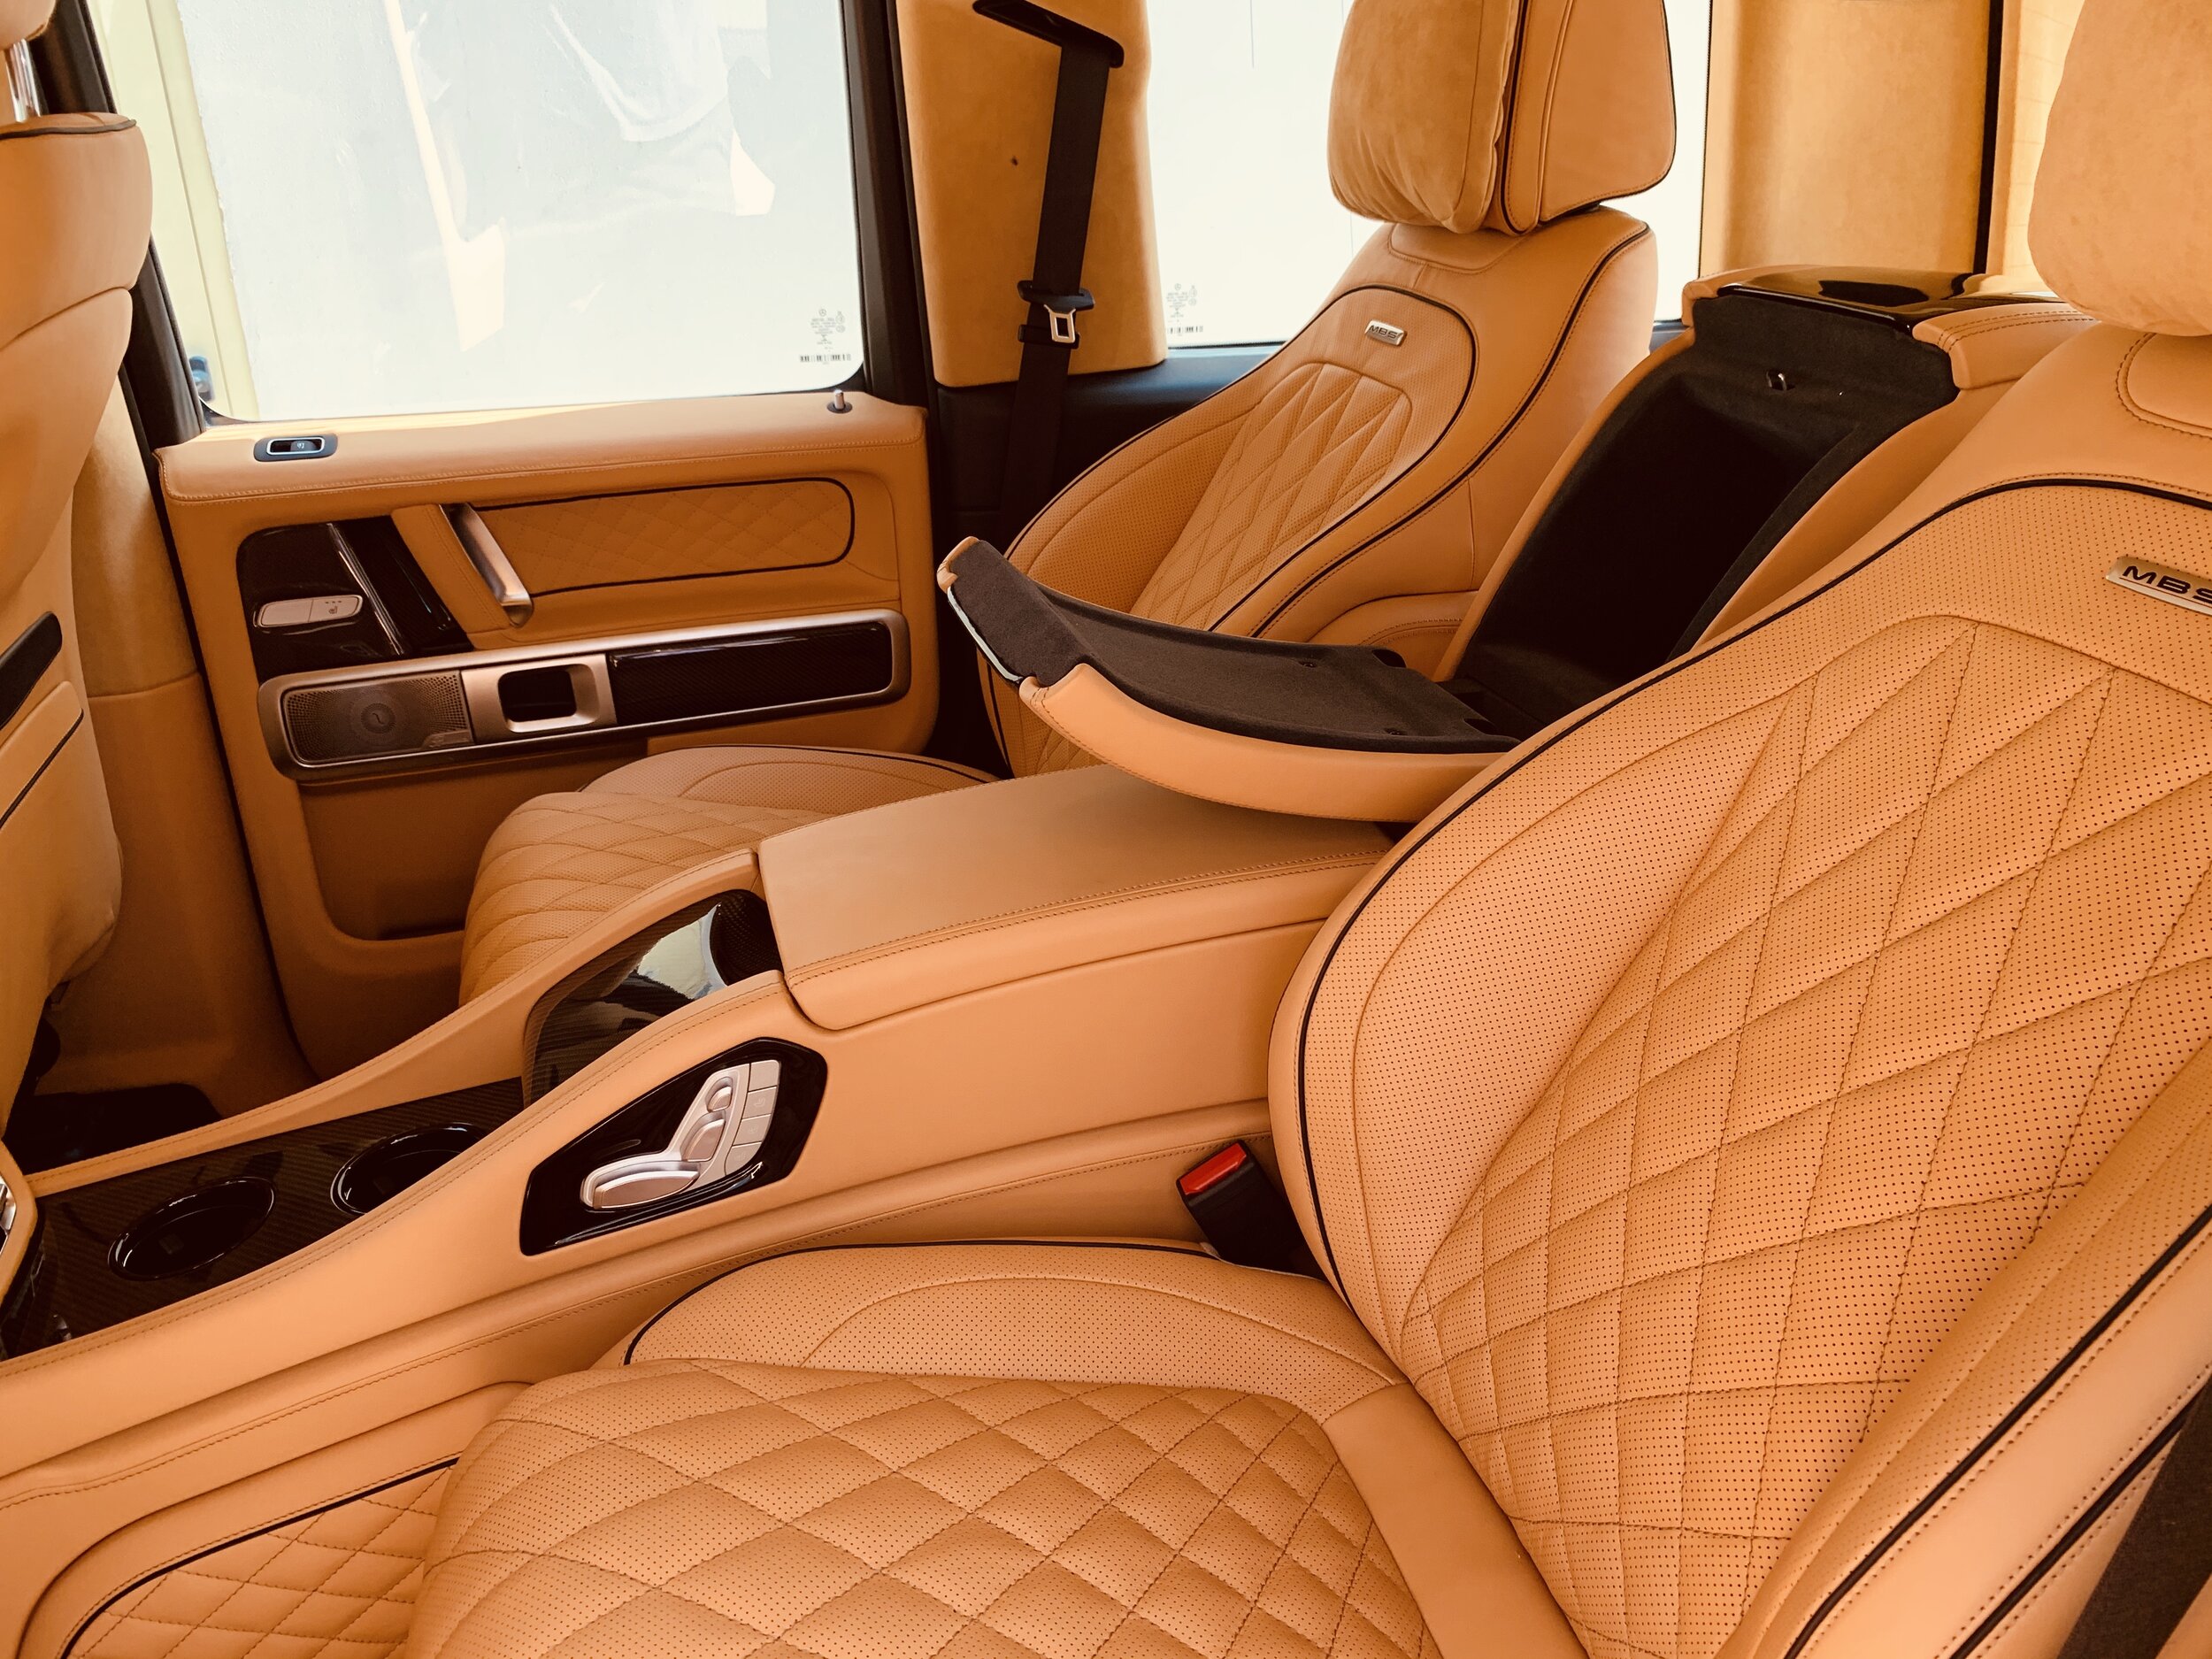 New Mercedes-Benz G63 AMG launched at Rs 2.19 crore - Times of India